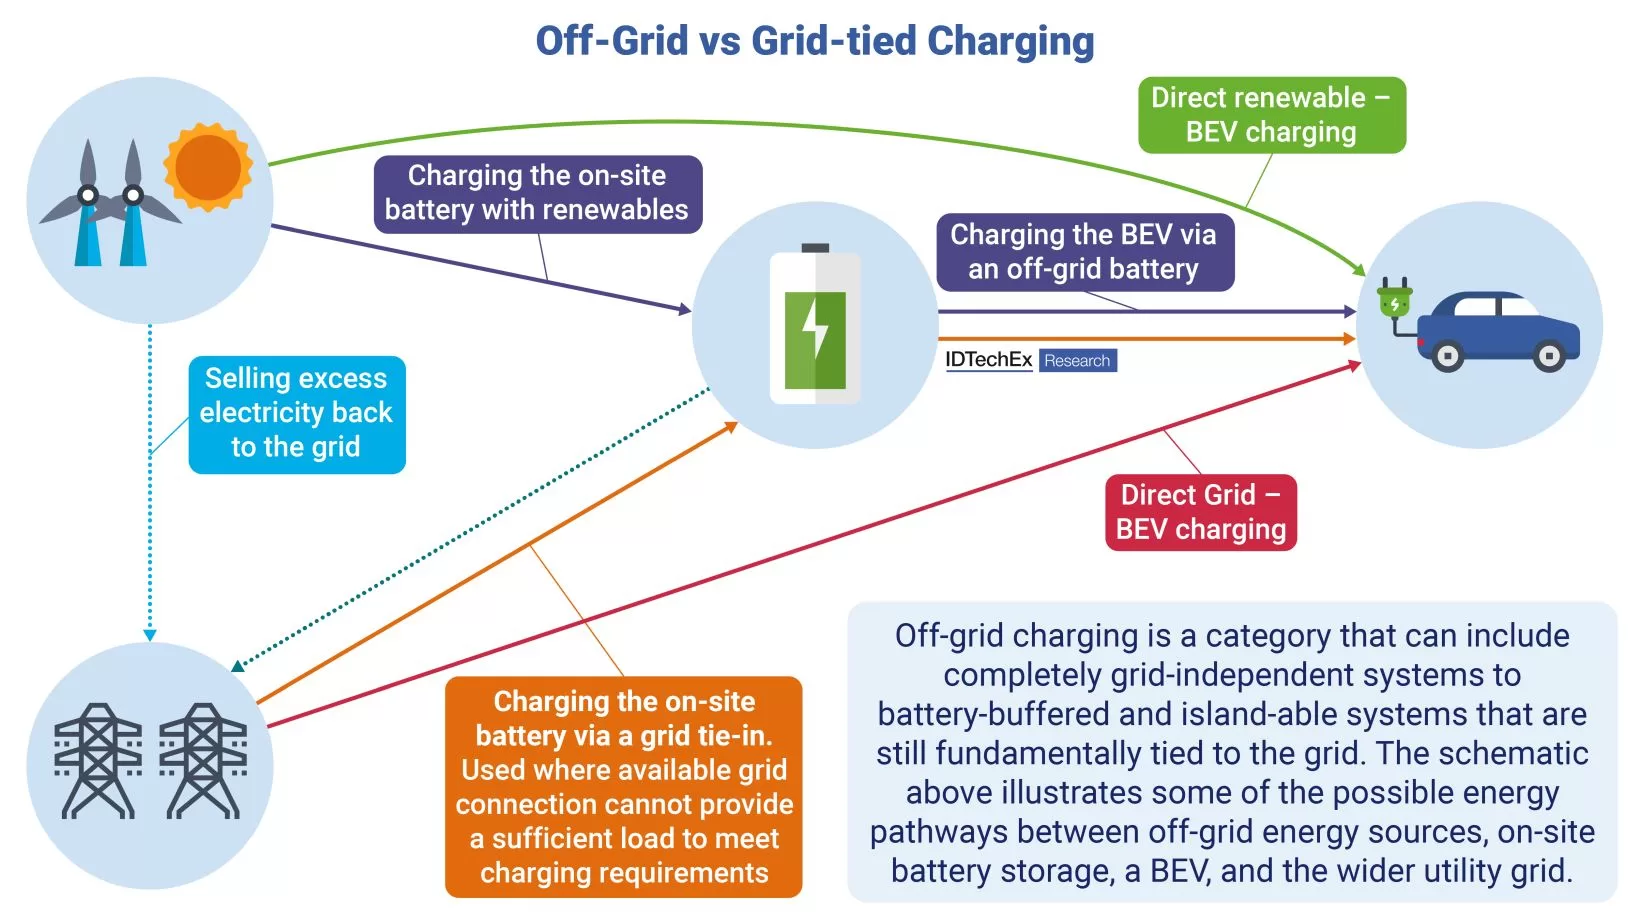 Overview of the different energy pathways for off-gridgrid-tied and a hybrid grid solution. Source IDTechEx.jpg